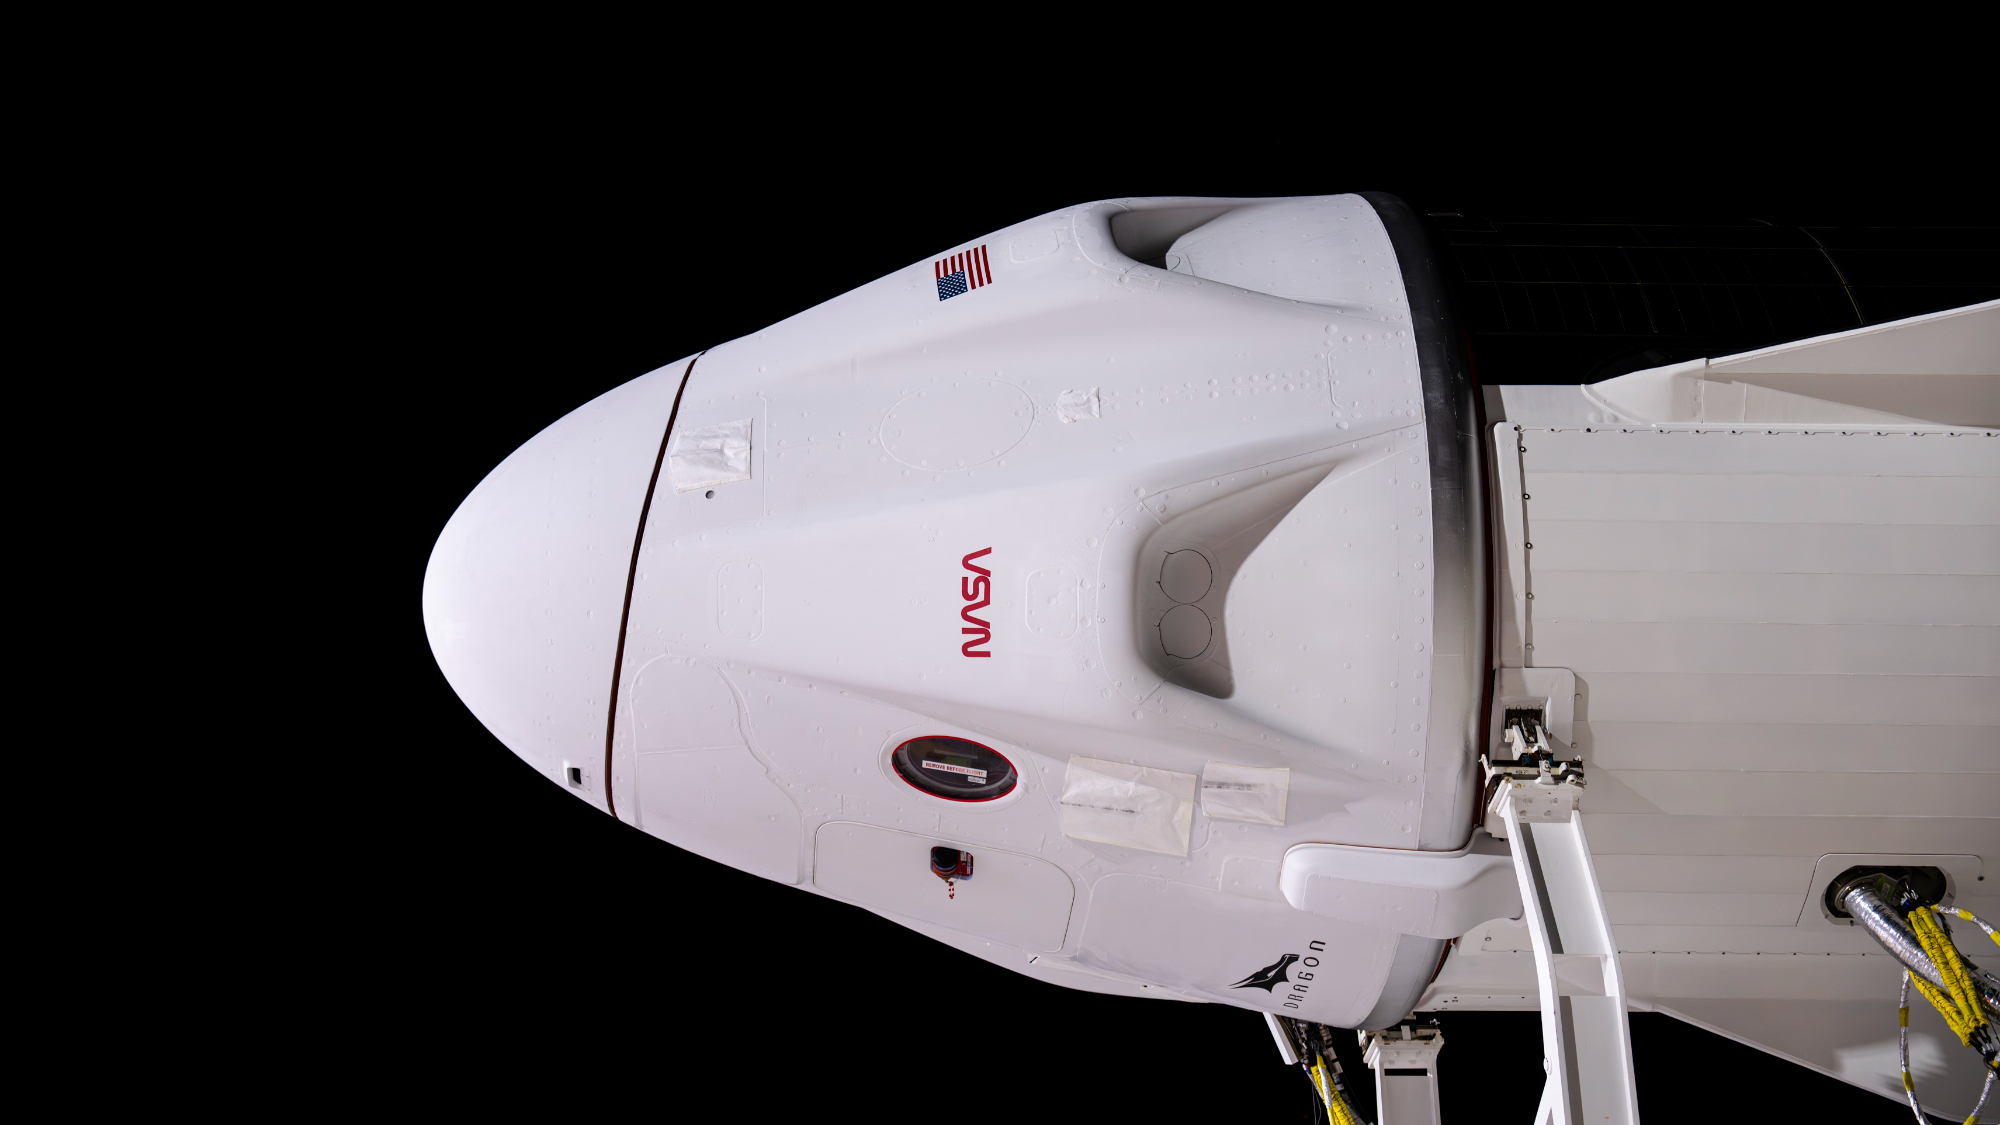 a white spacex dragon capsule is seen horizontally, pointing to the left, against a black background.